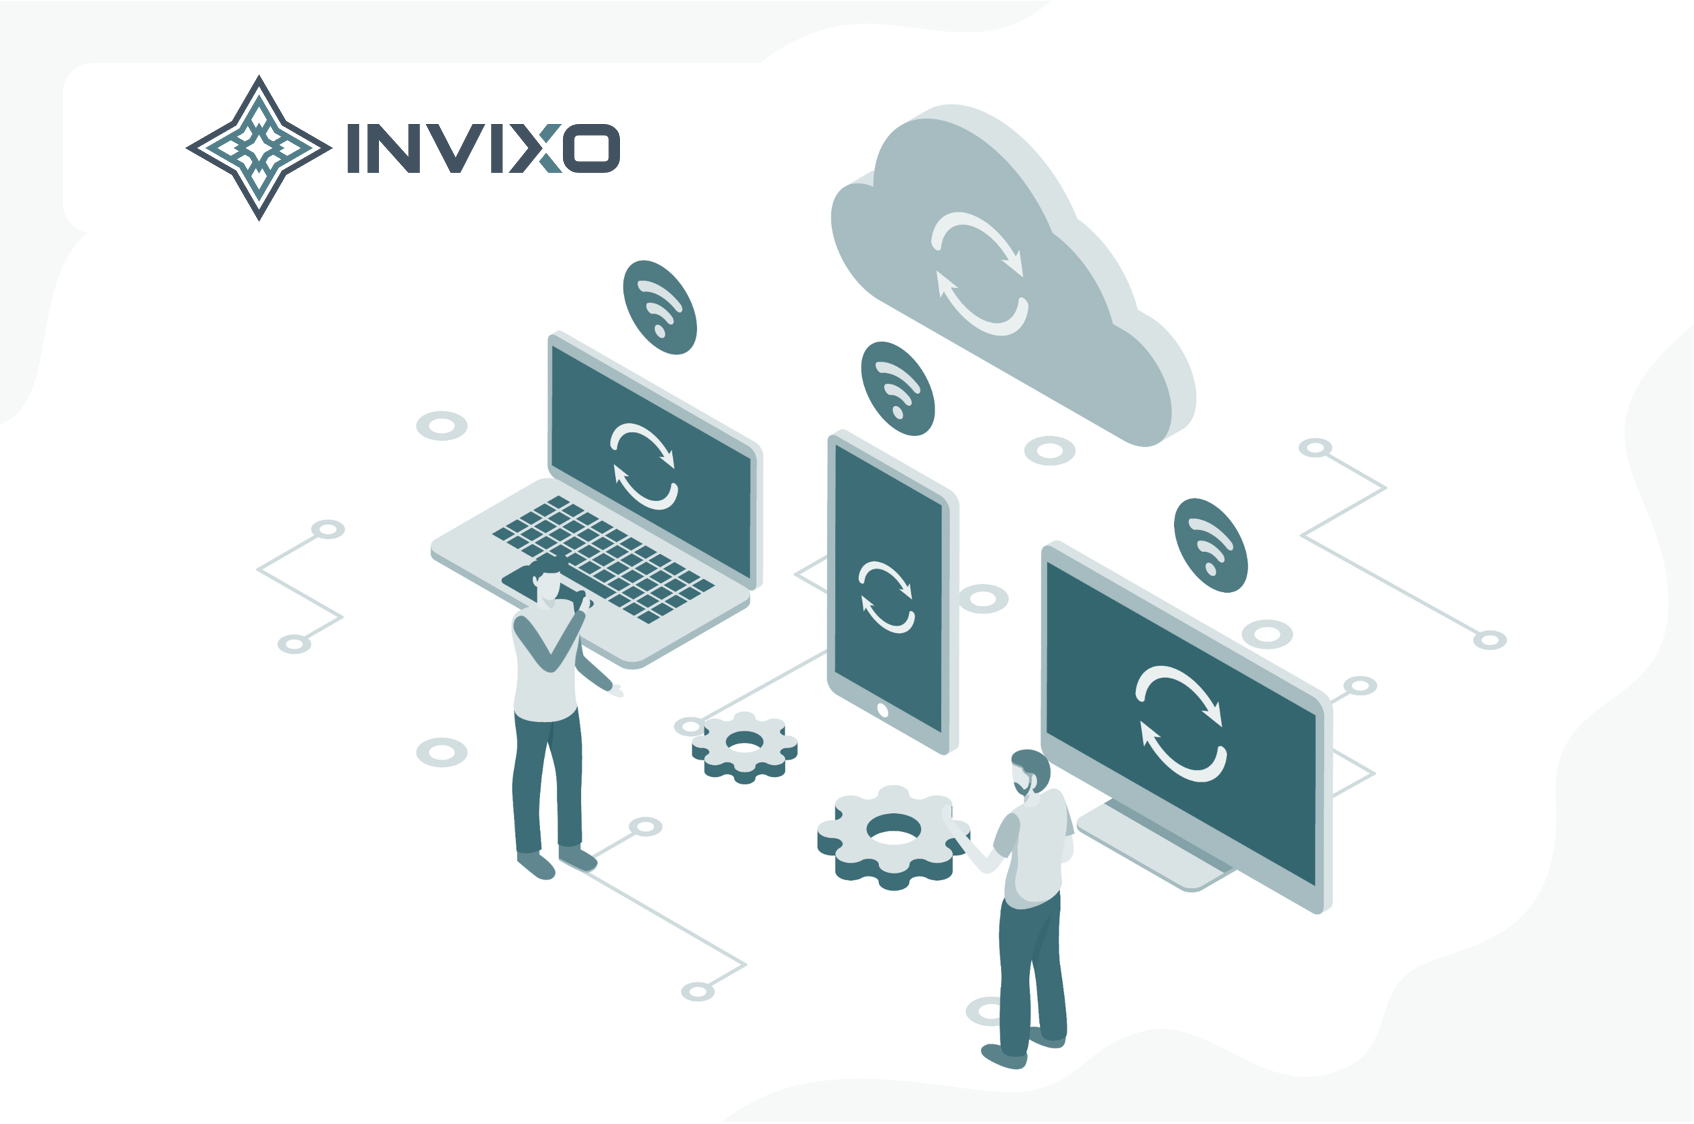 INVIXO – The Ultimate Name for Growing Digitizing Your Organization